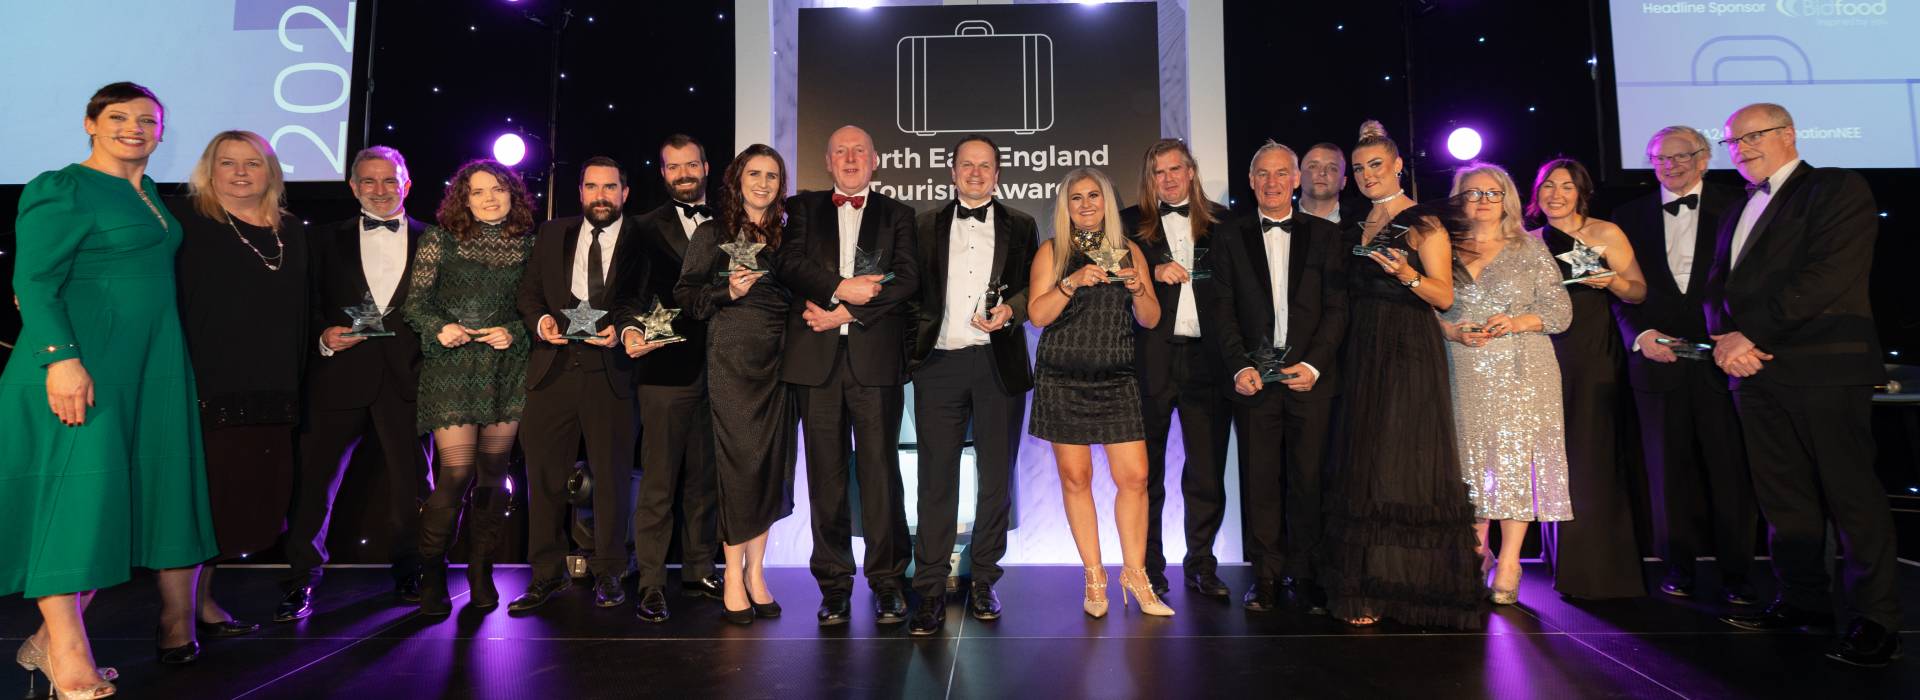 Four of North East England’s Tourism Trailblazers Announced as Finalists at National Awards